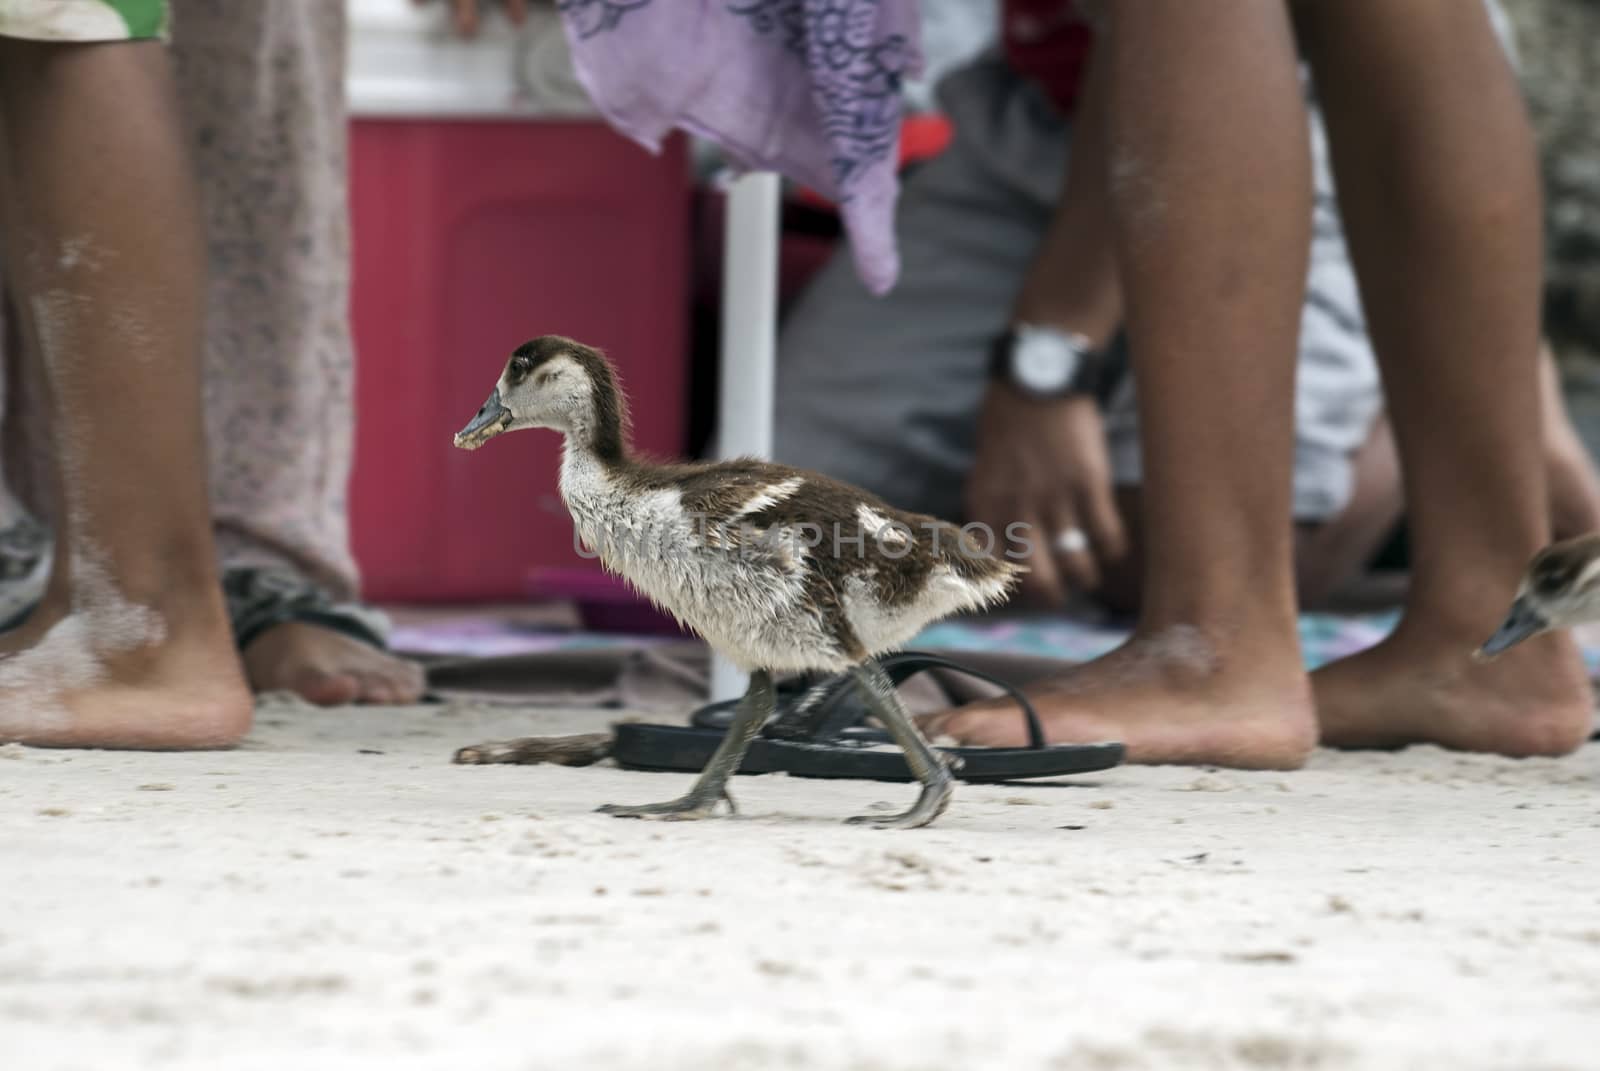 An Egyptian gosling walking amongst holidaymakers on a beach in South Africa